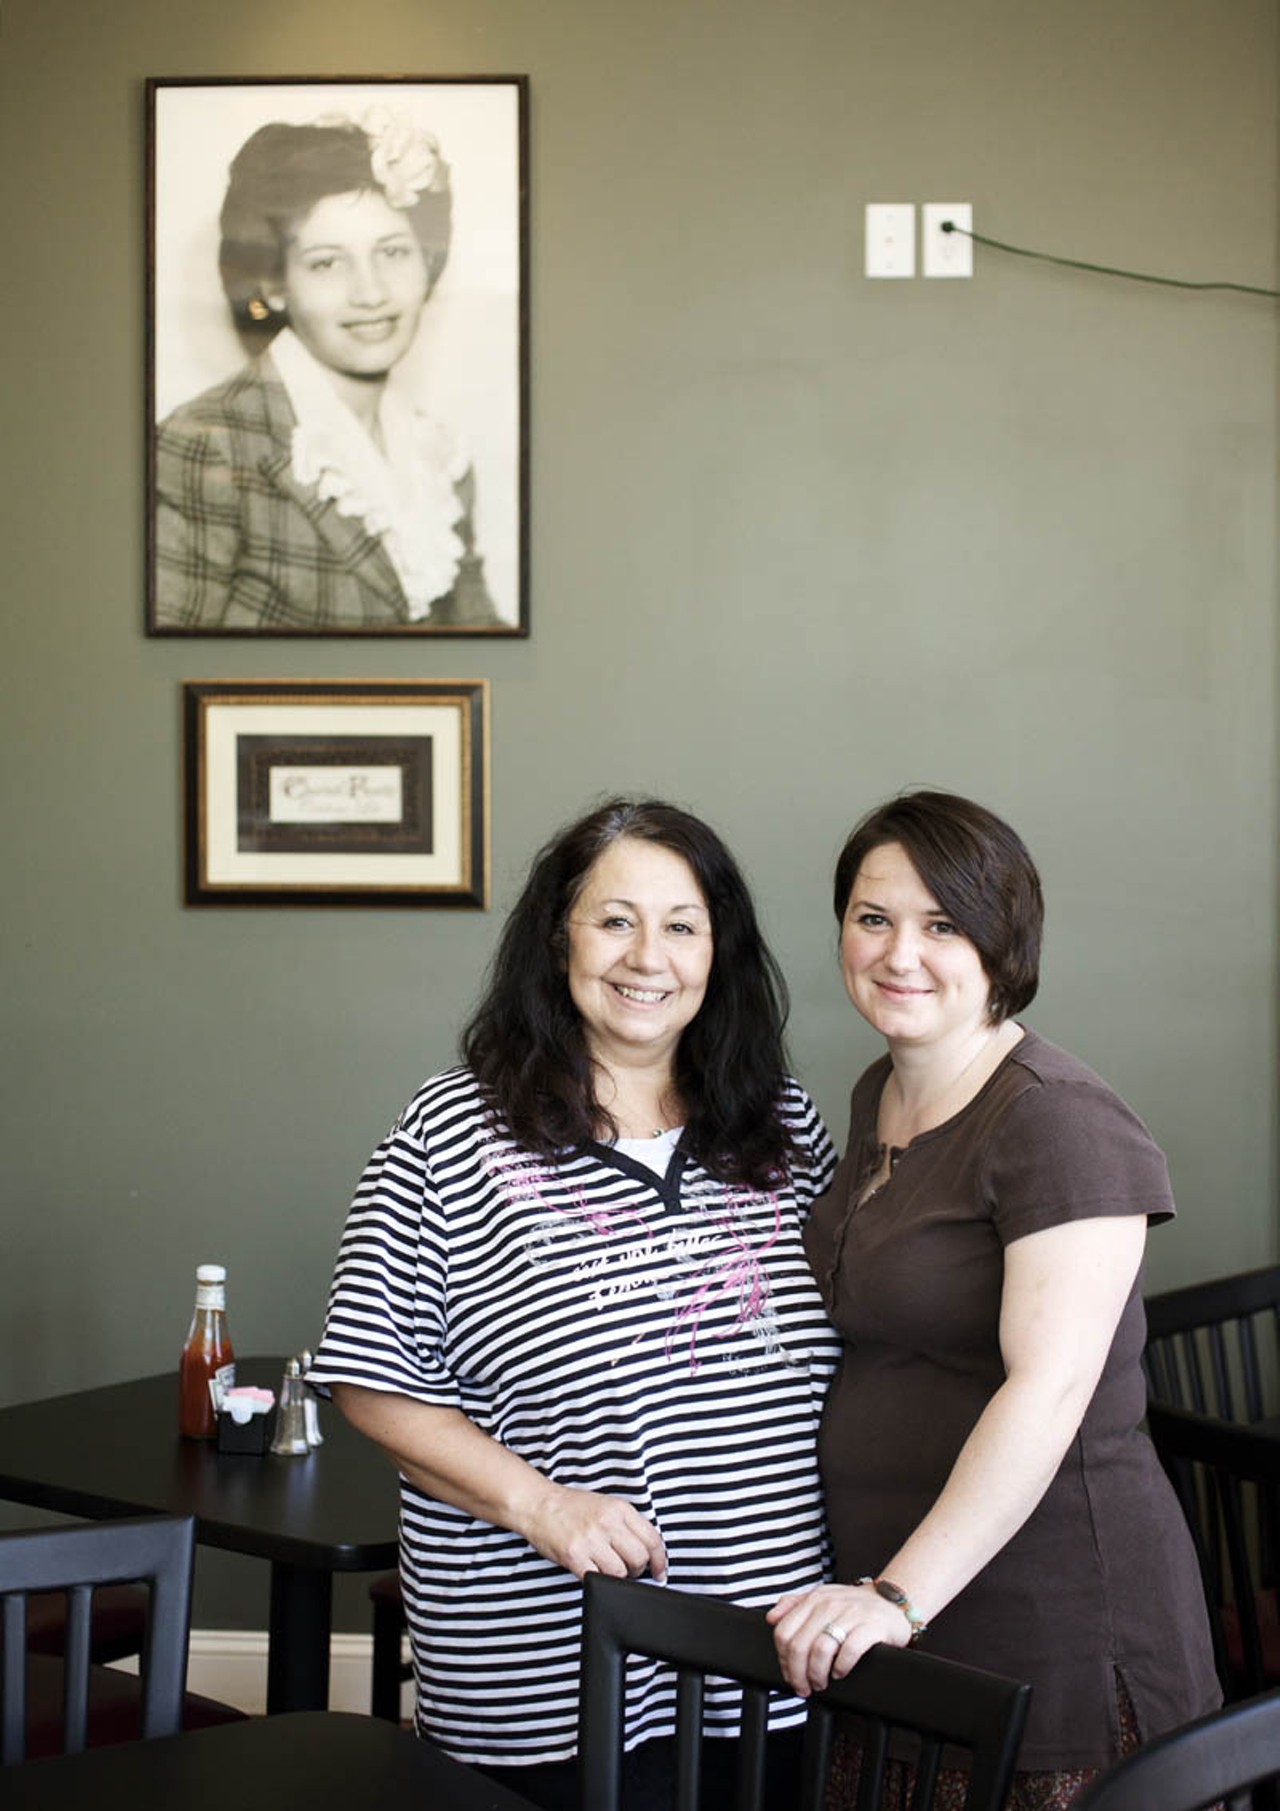 Mary Samuelson (left) and daughter Amy Keller (right) posing in the restaurant's interior below a portrait of Mary's mother and restaurant namesake, Josephine.